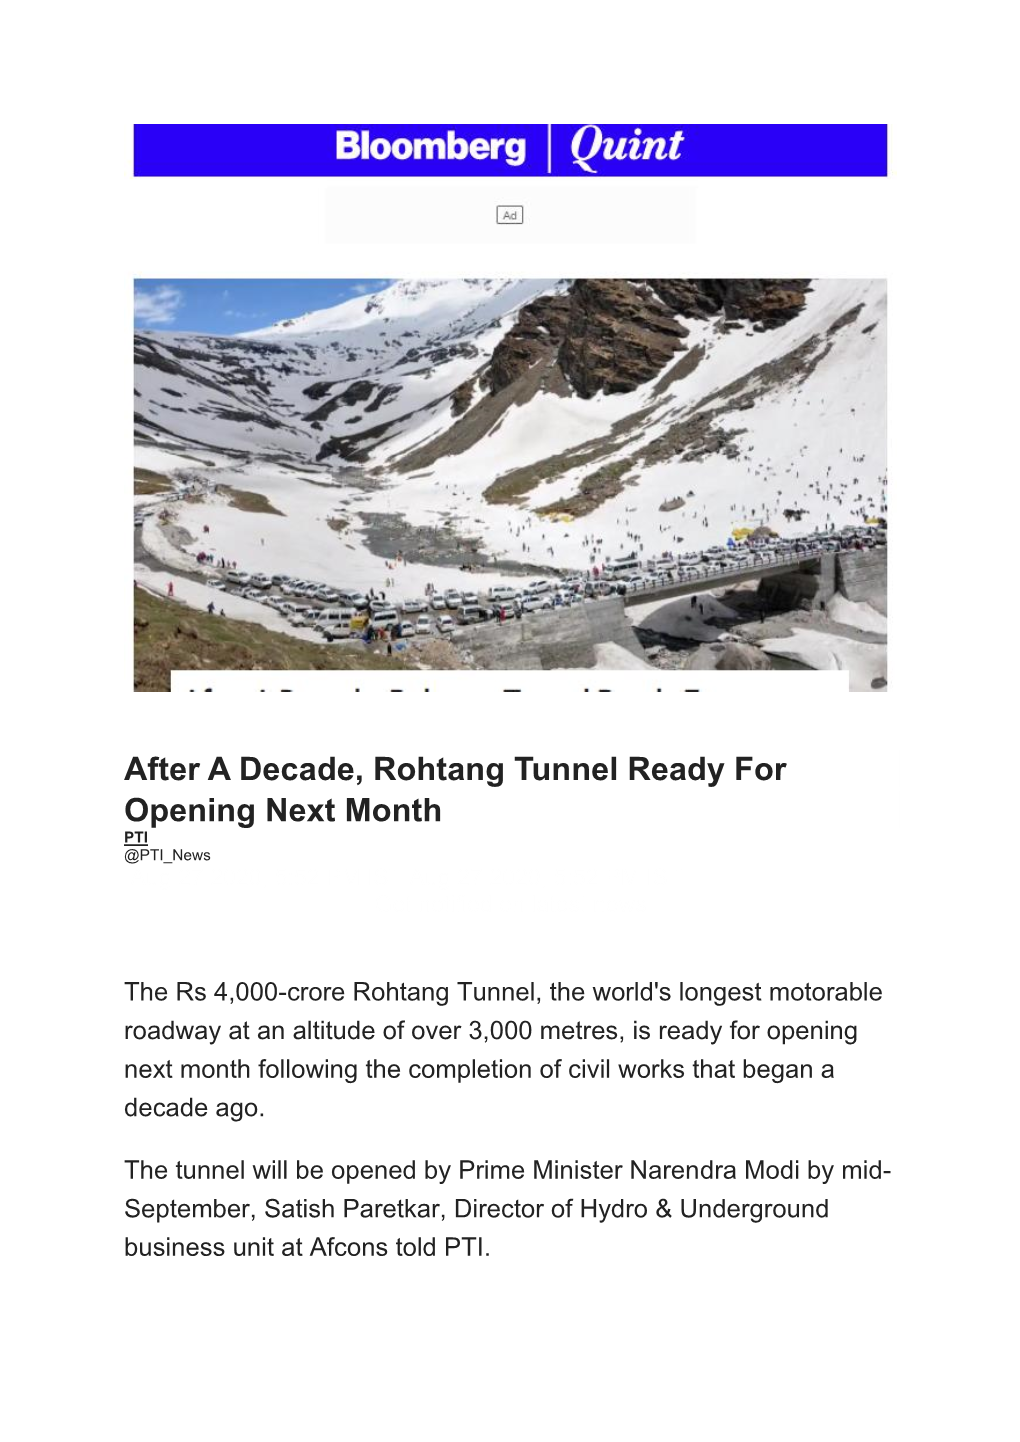 After a Decade, Rohtang Tunnel Ready for Opening Next Month PTI @PTI News Aug 27 2020, 5:52 PM IST Aug 27 2020, 5:52 PM IST Get Notified on Latest News